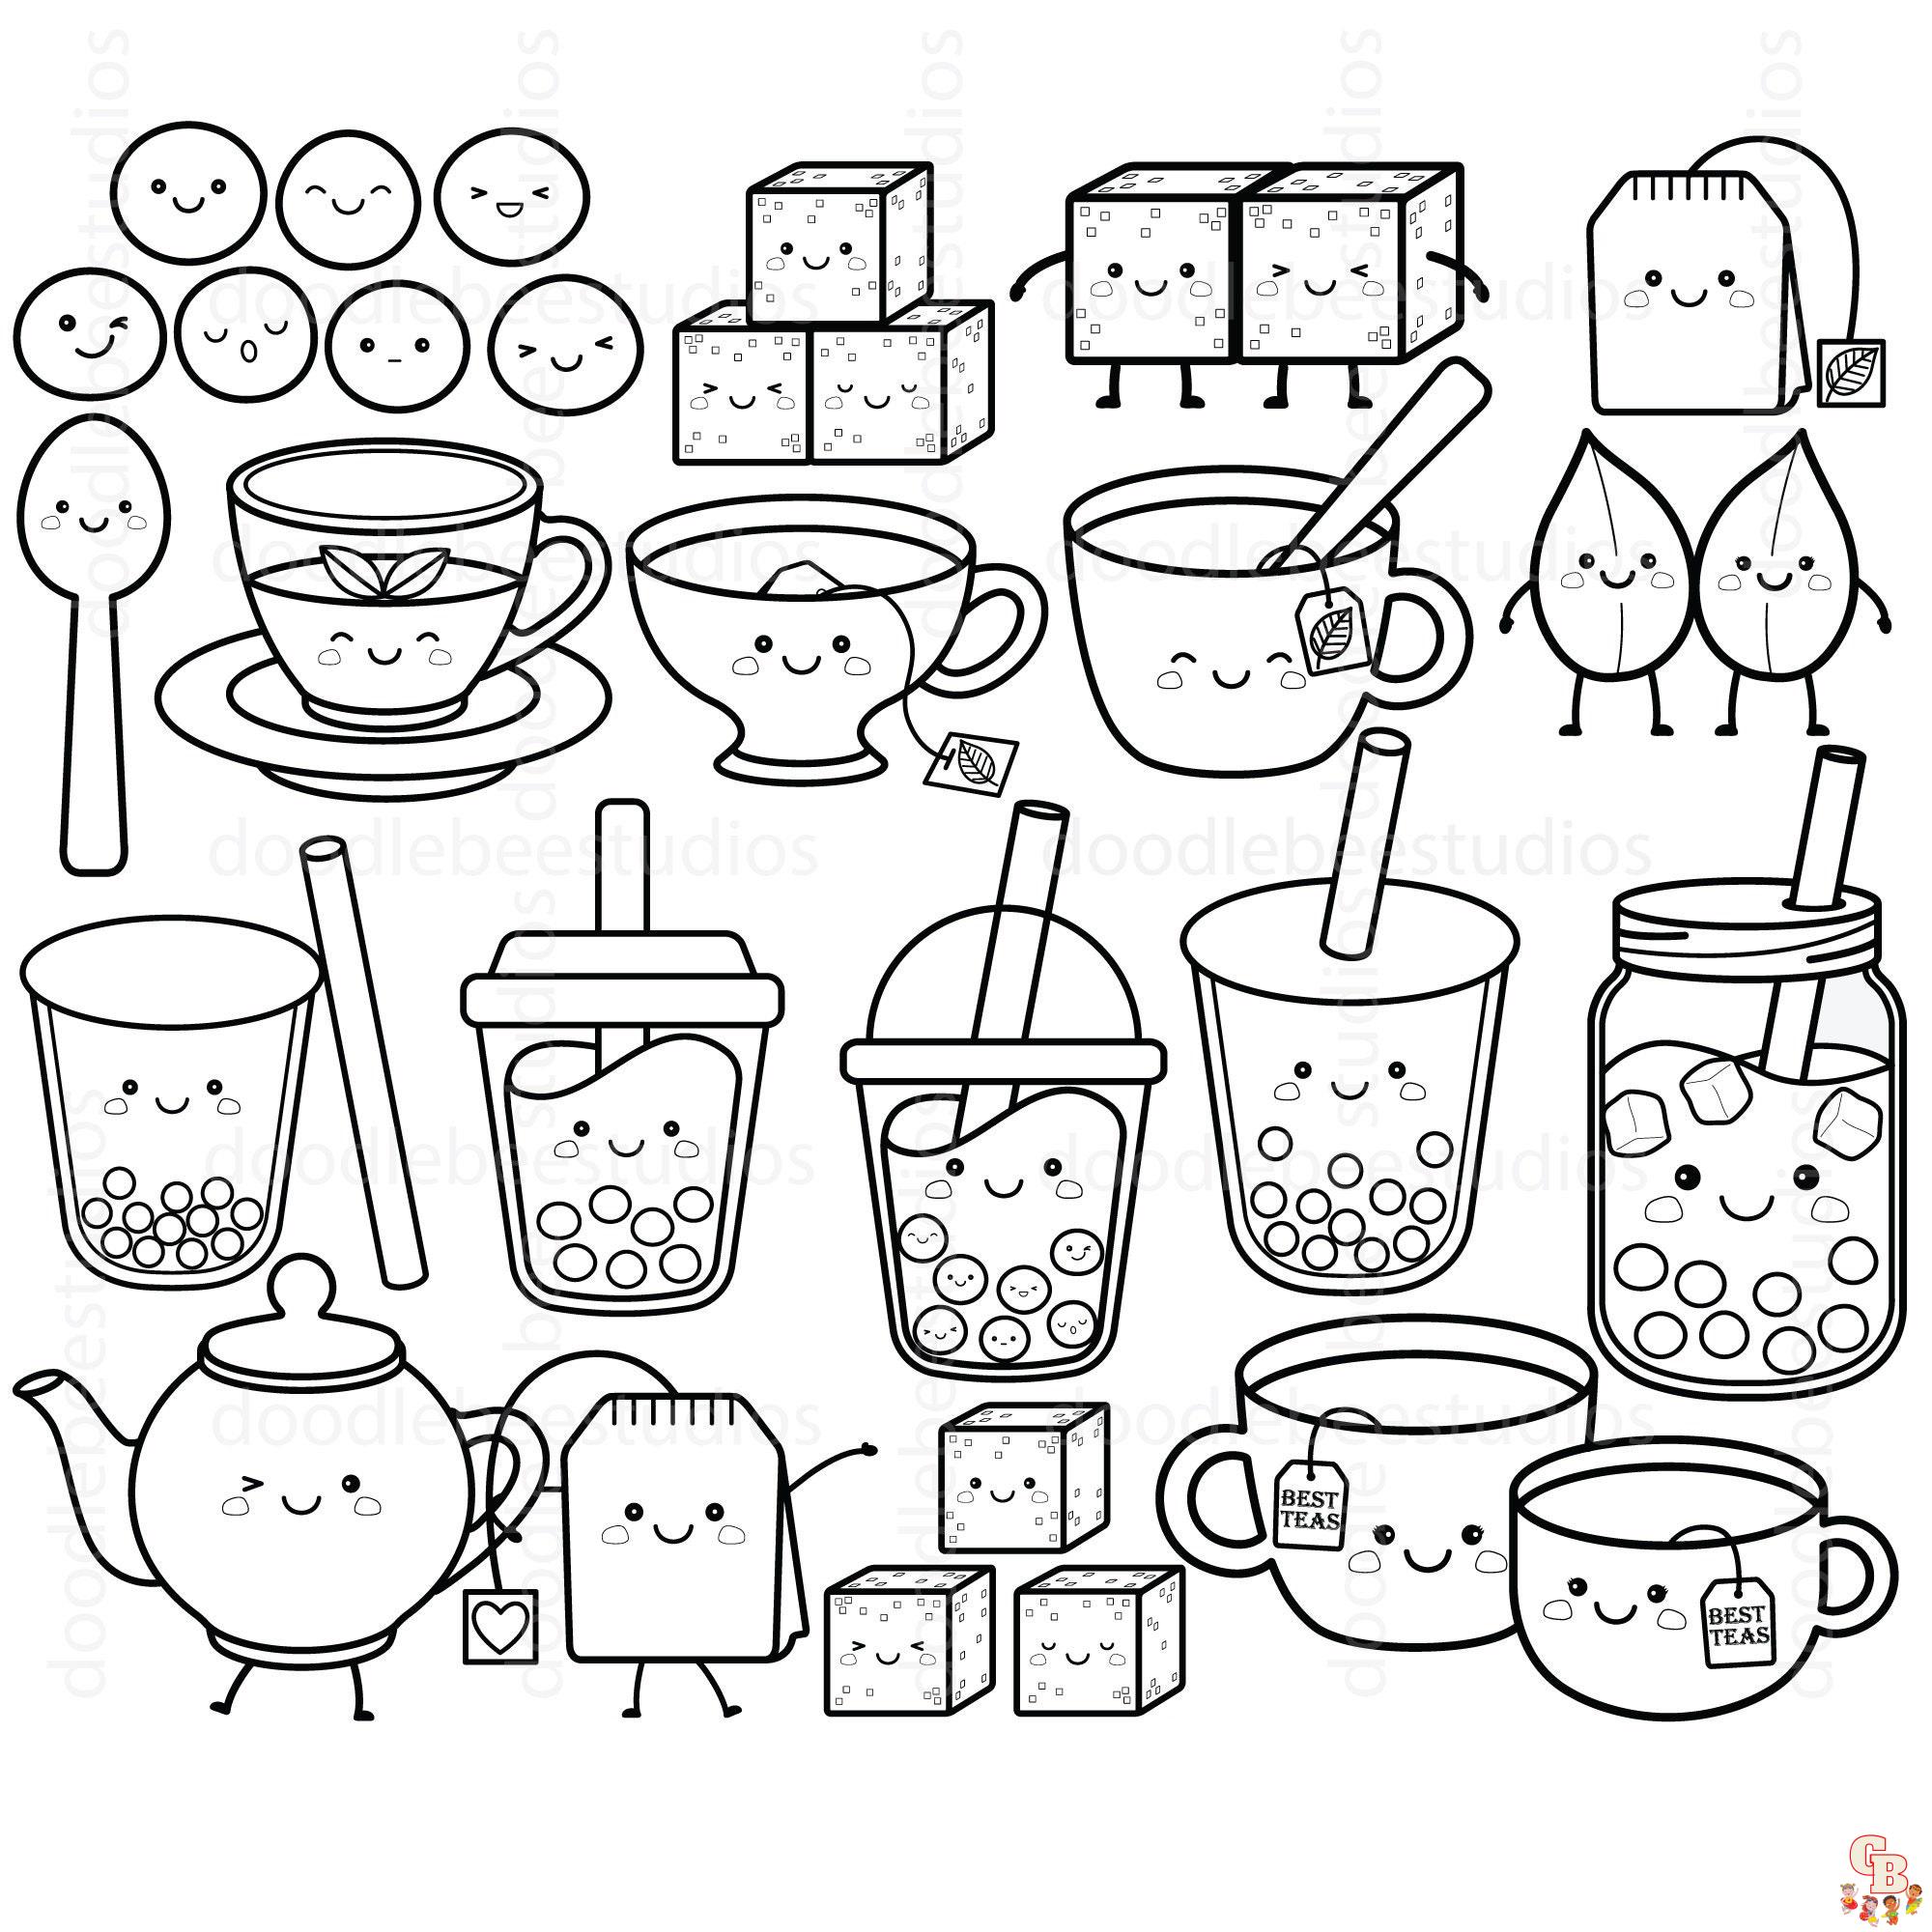 Boba Tea Coloring Pages - Coloring Home